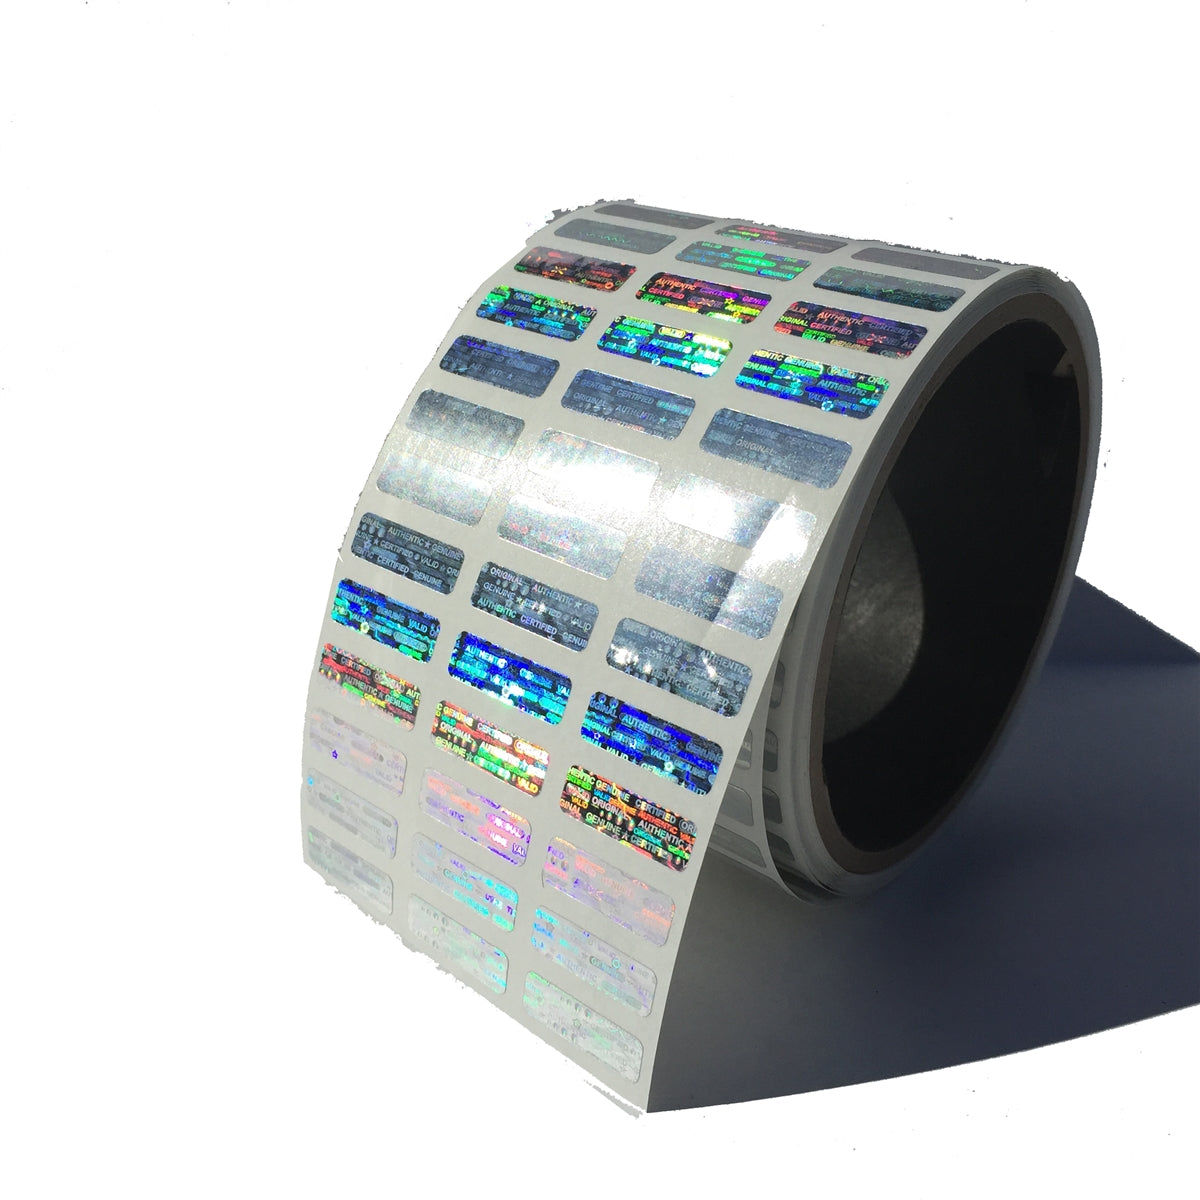 500 Silver Tamper Evident Holographic Security Label Seal Sticker, Rectangle 1" x 0.375" (25mm x 9mm).